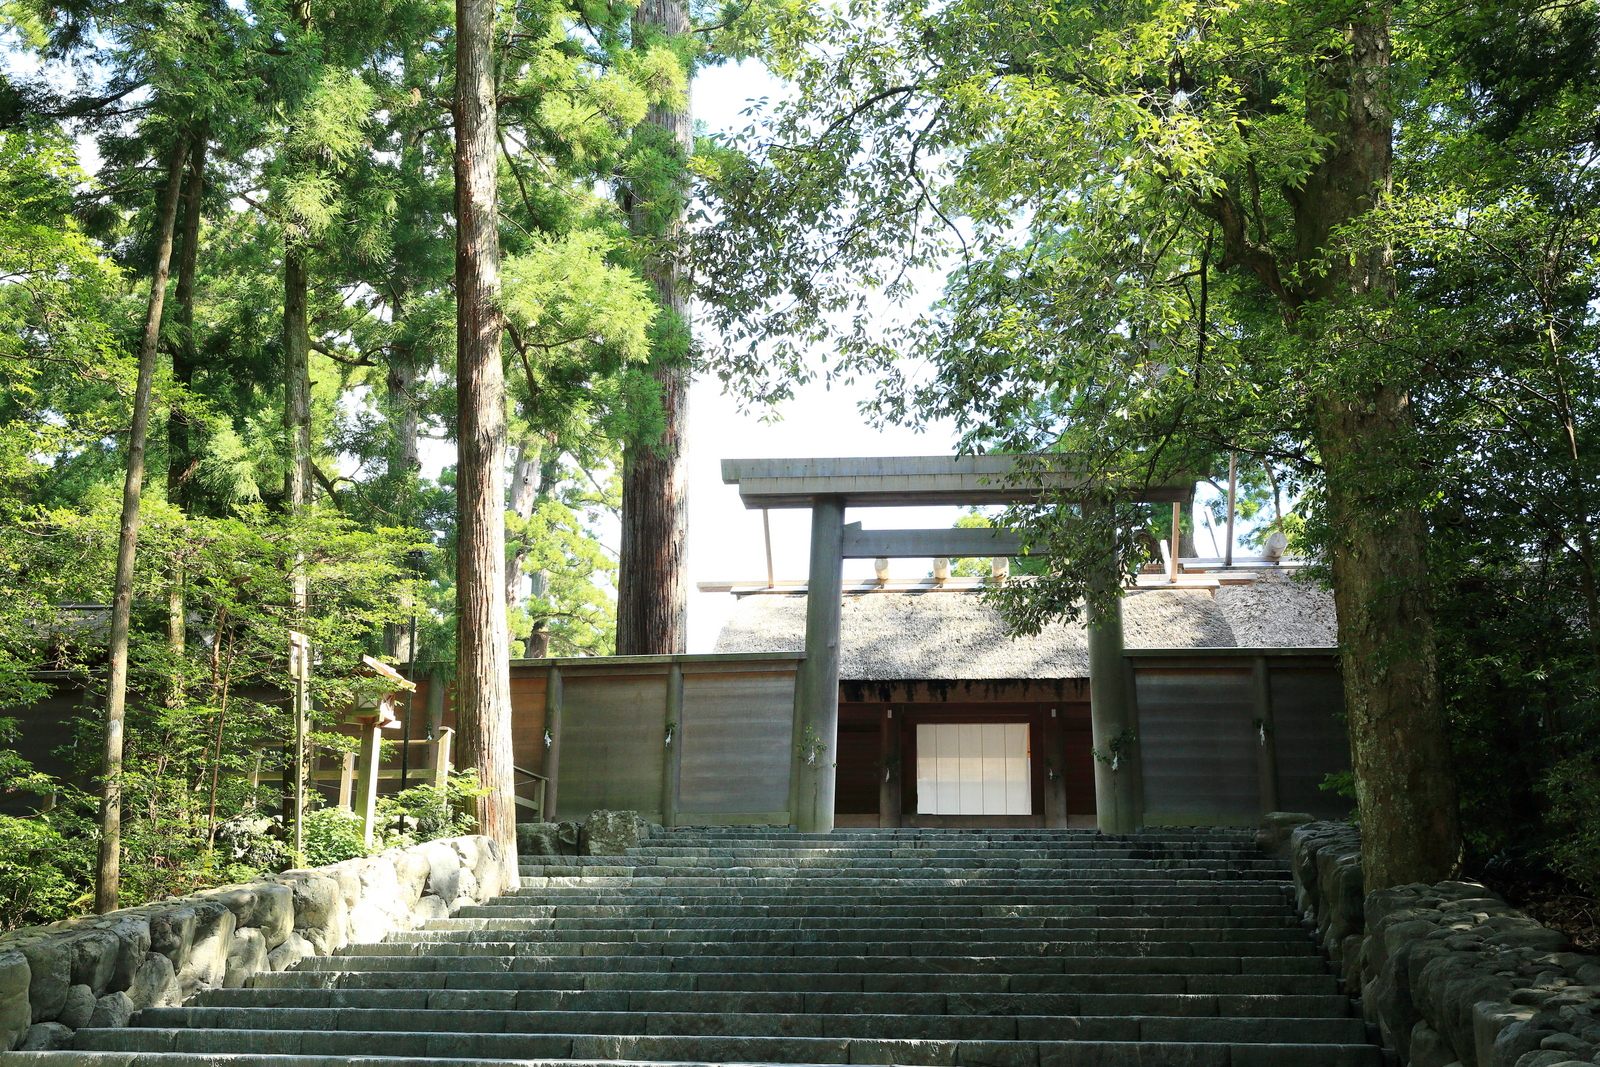 Feel the holy air while climbing the stone steps to the Goshogu for a special pray.
（c）JINJA SHICHO
